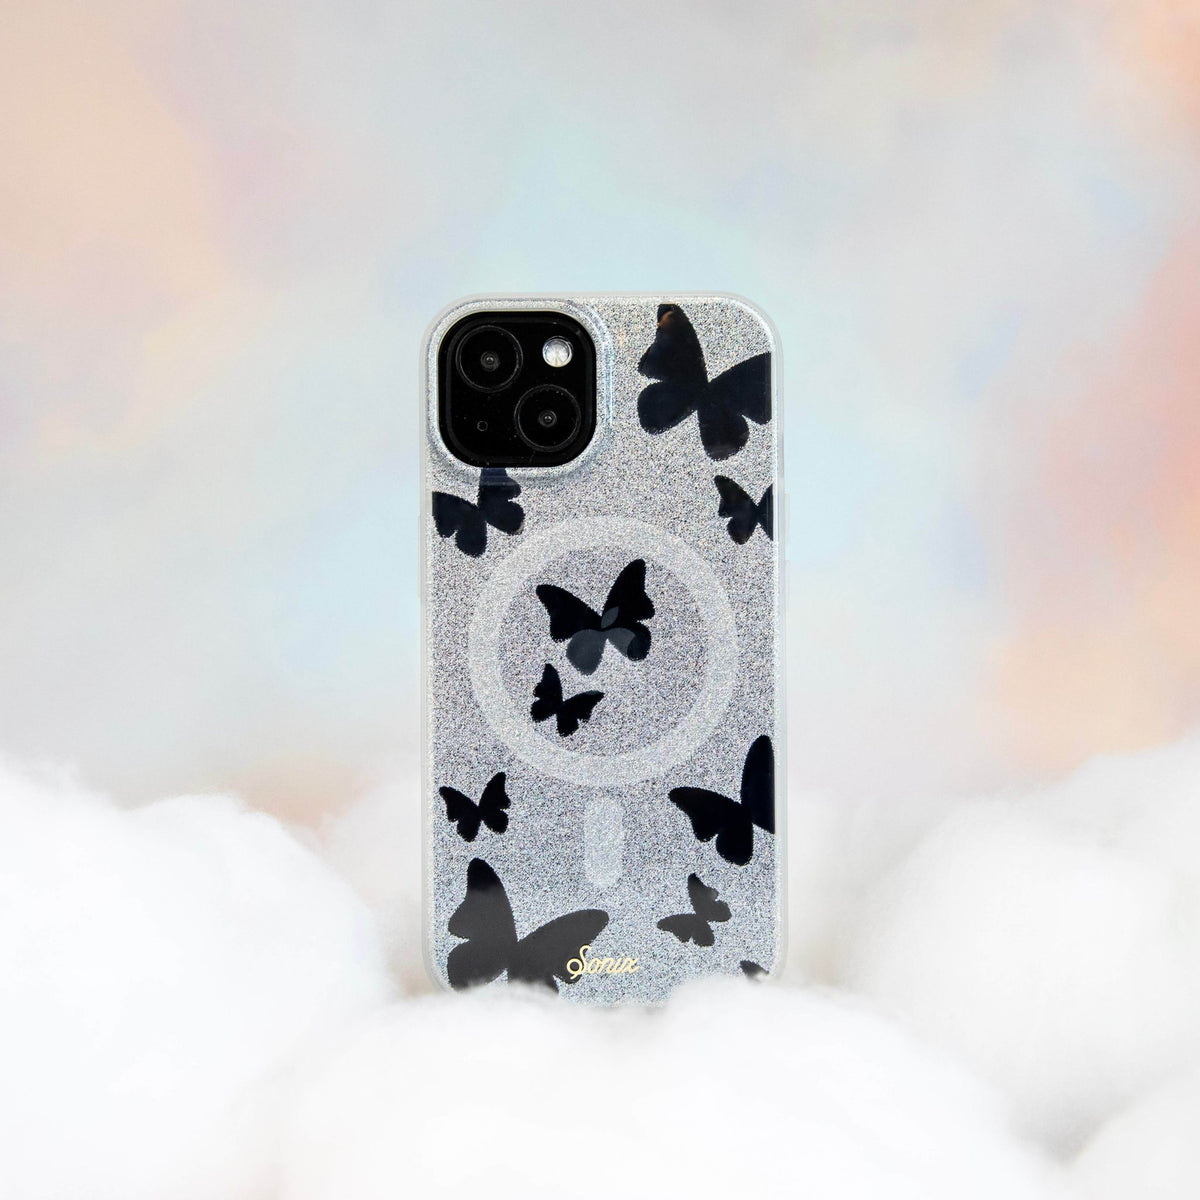 Glitter Clear MagSafe iPhone 15 Pro case